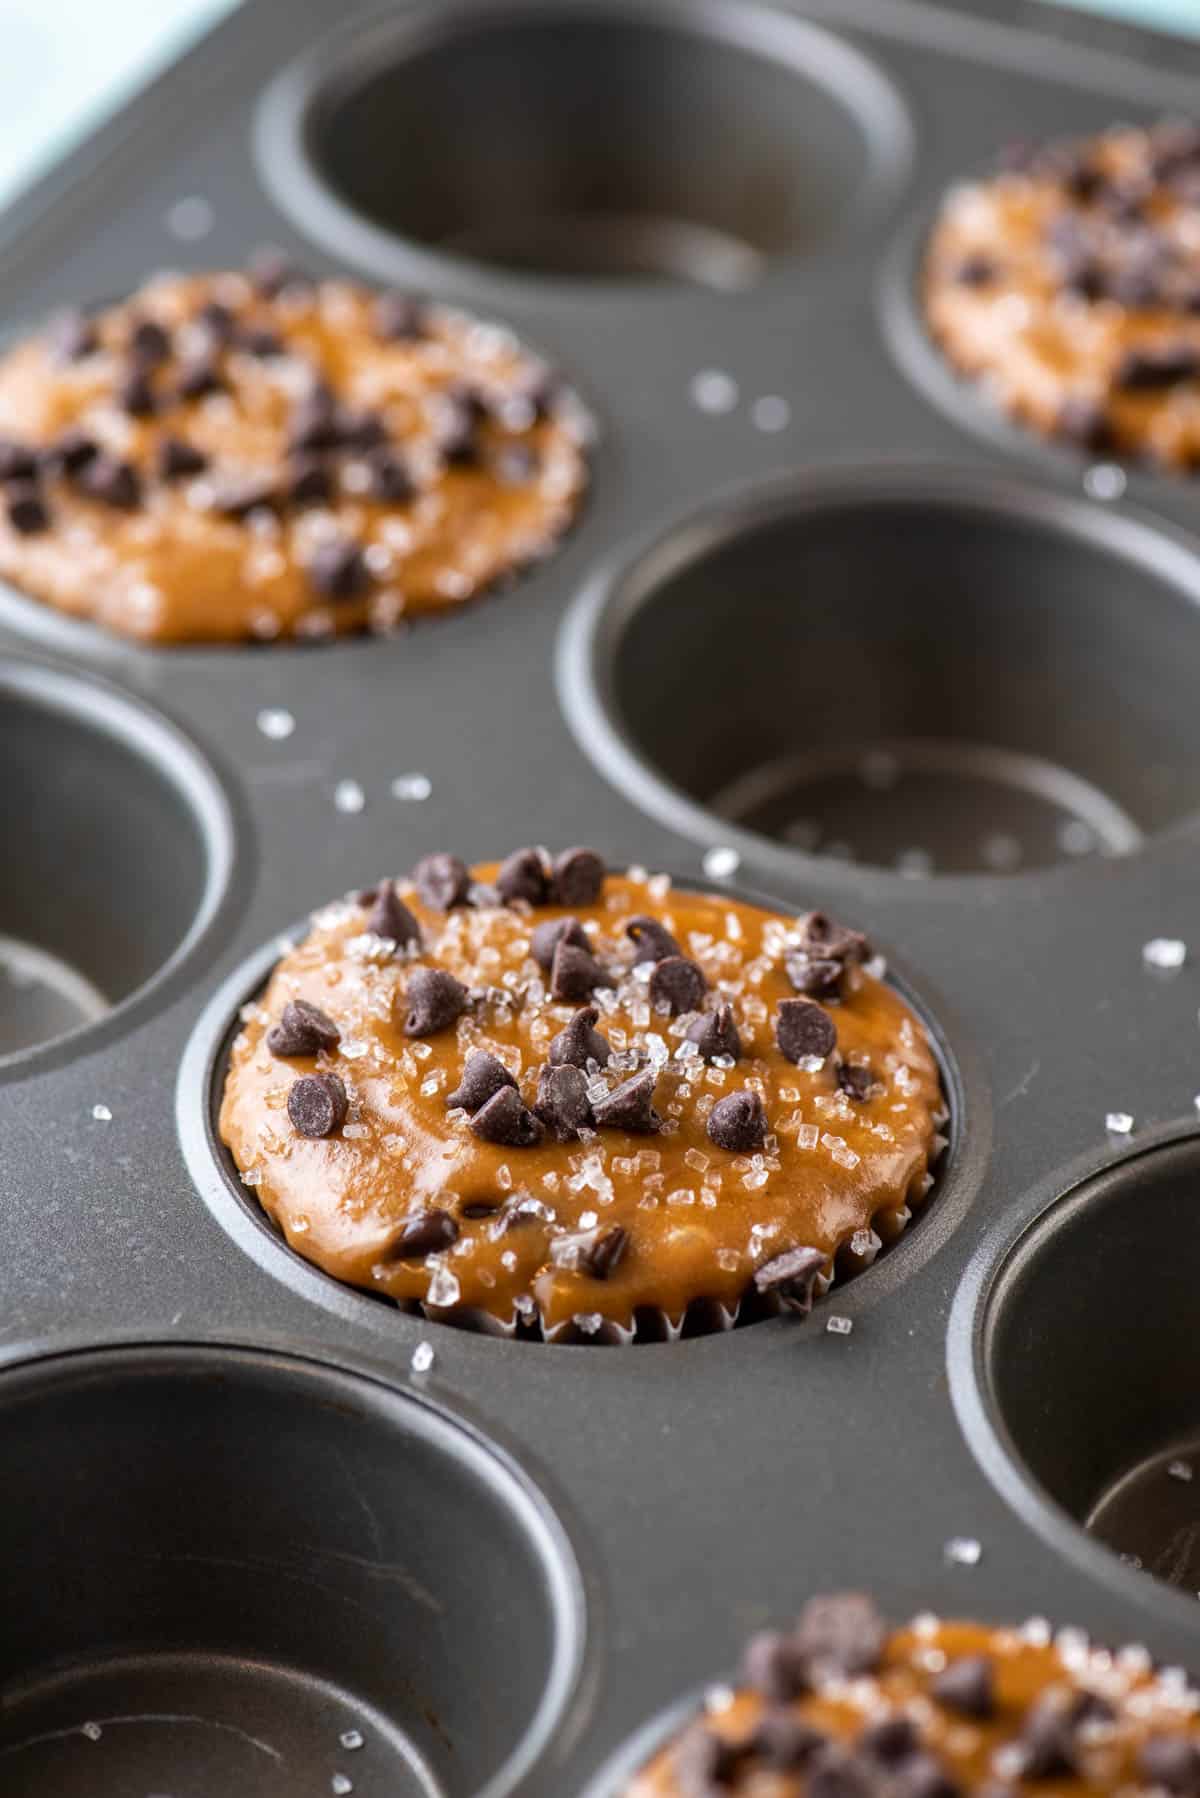 cappuccino chip muffin batter filling every other hole of a muffin pan, topped with mini chocolate chips and sprinkled with sanding sugar